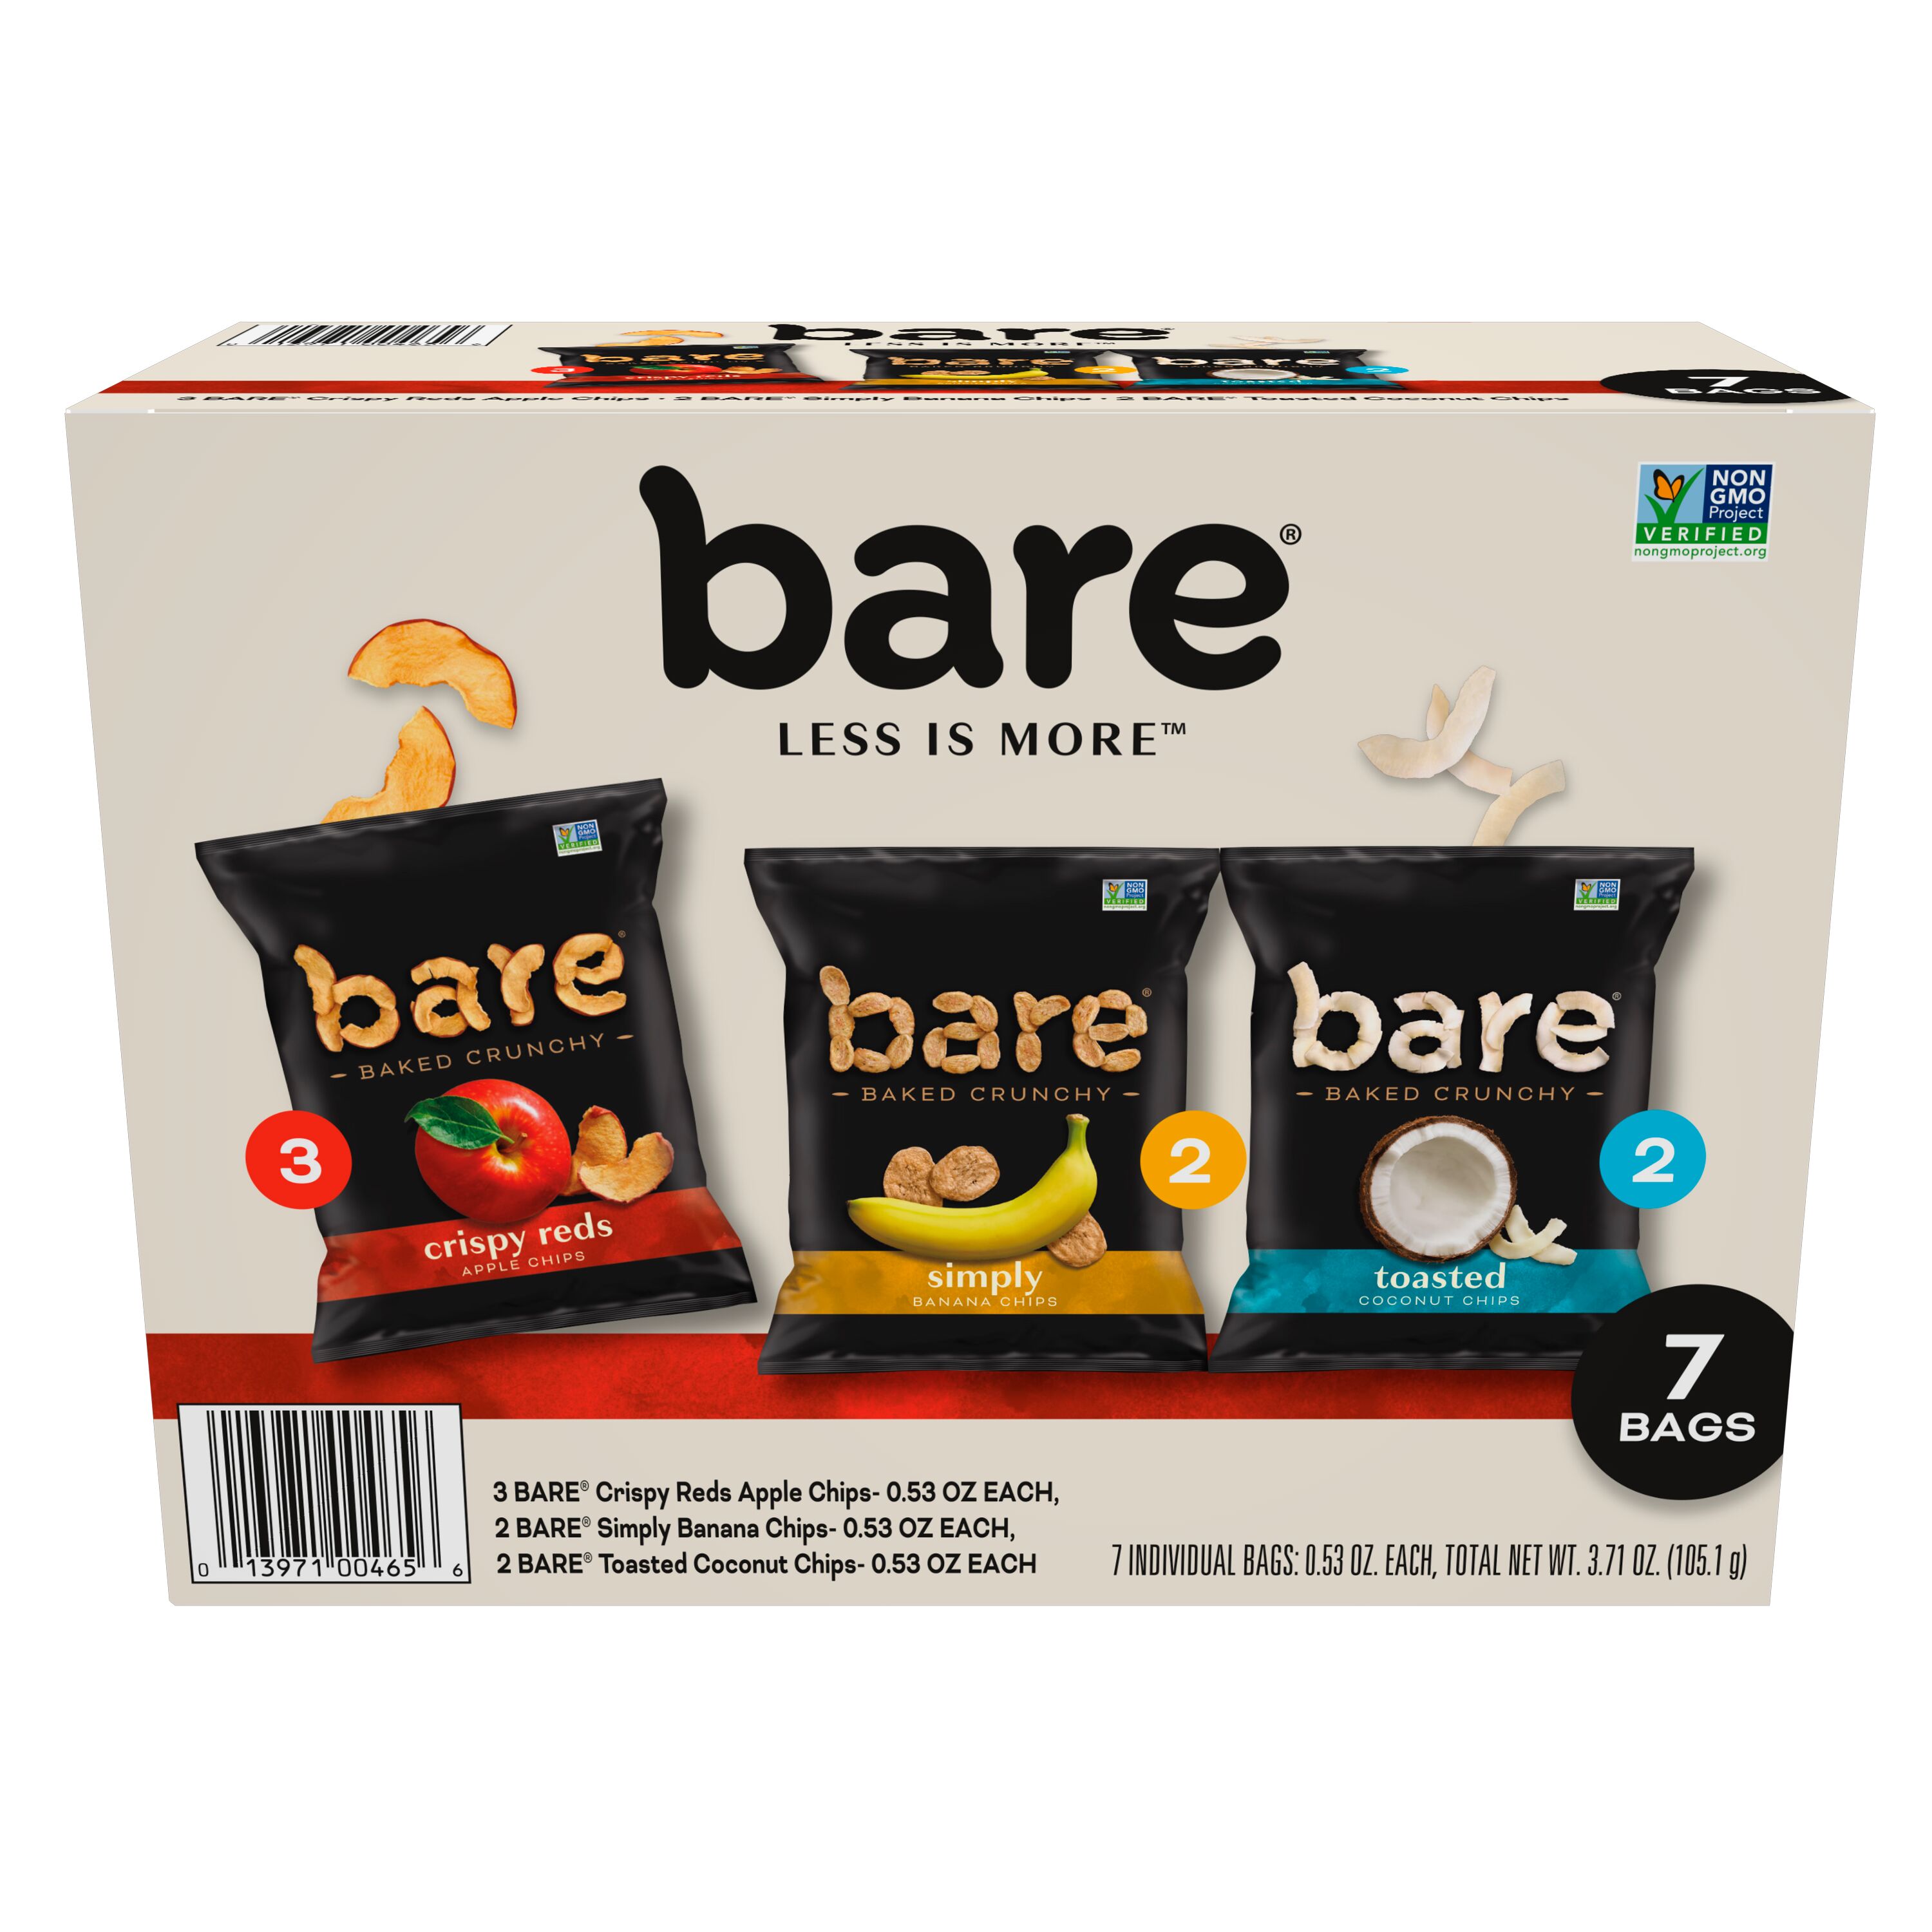 Bare, Baked Crunchy Fruit Chips Snack Pack, 0.53 oz Bags, 7 Count - image 1 of 12